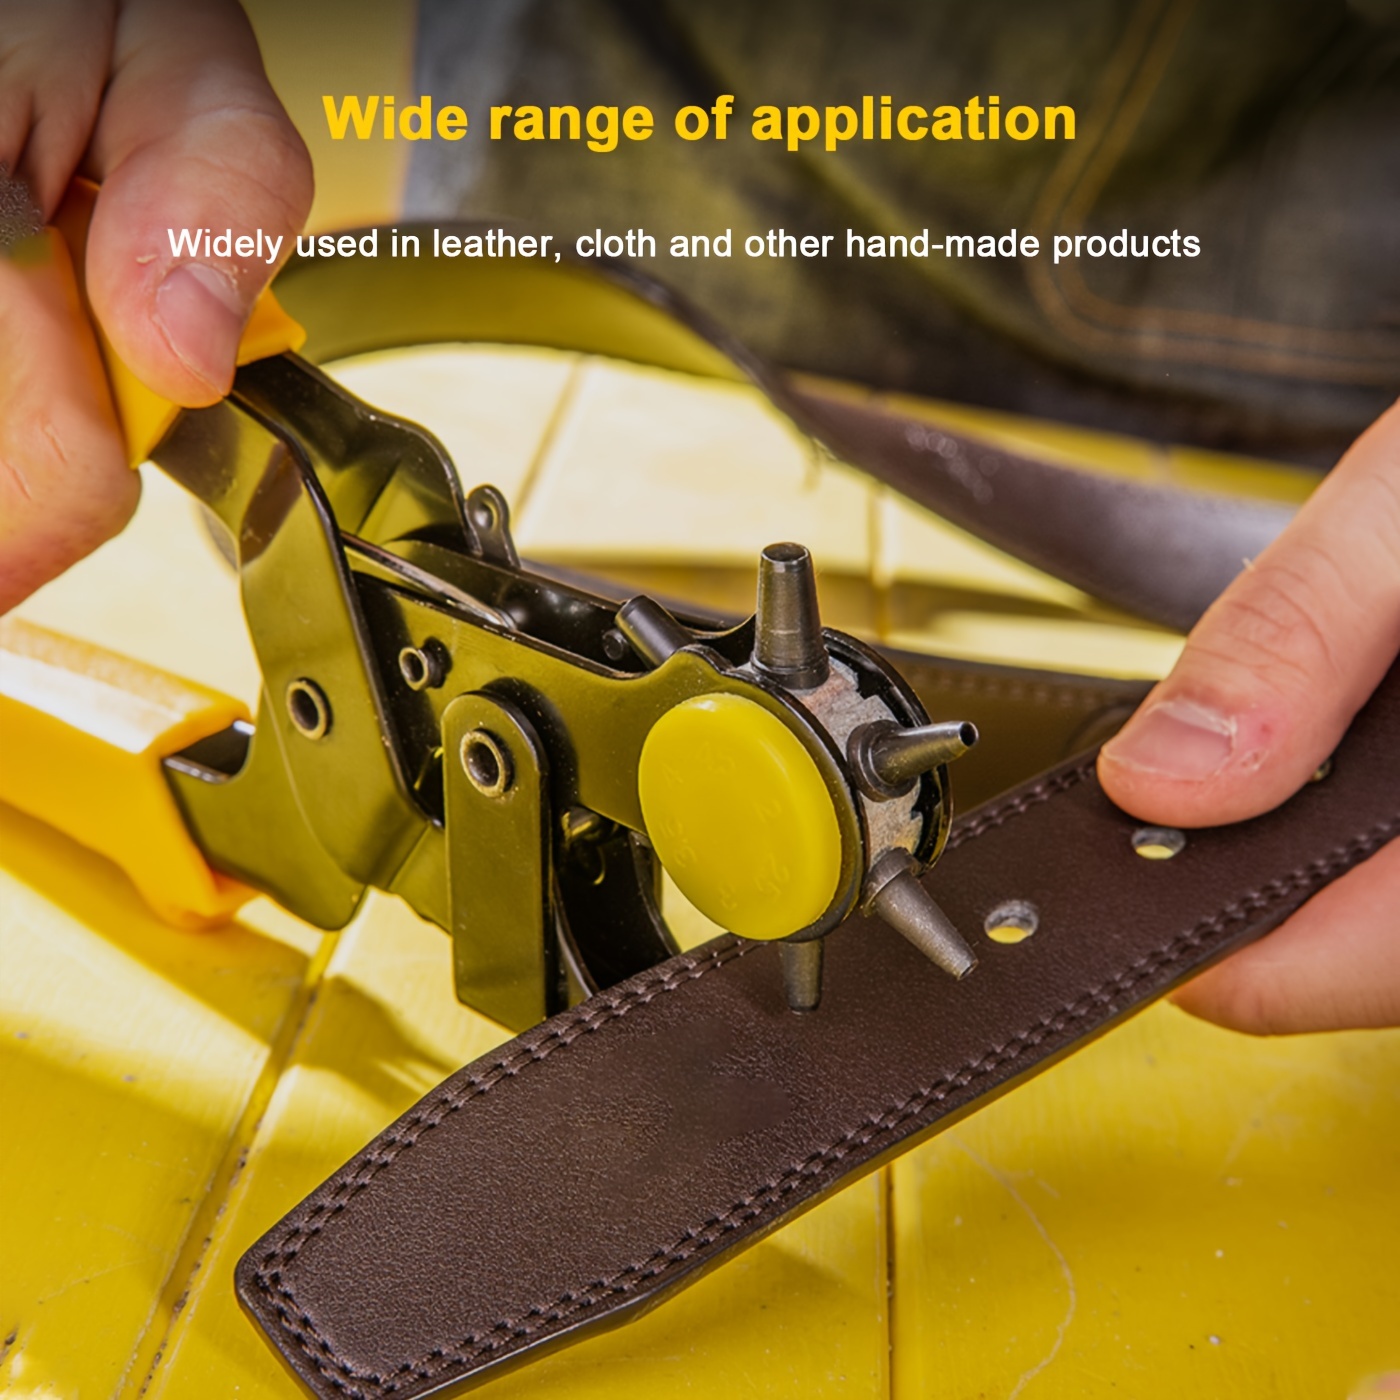 1pc Revolving Leather Punch Plier Punch Hole Tool Puncher For Belt Saddle  Watch Bands Strap Shoe Fabric Paper Working Leathercraft